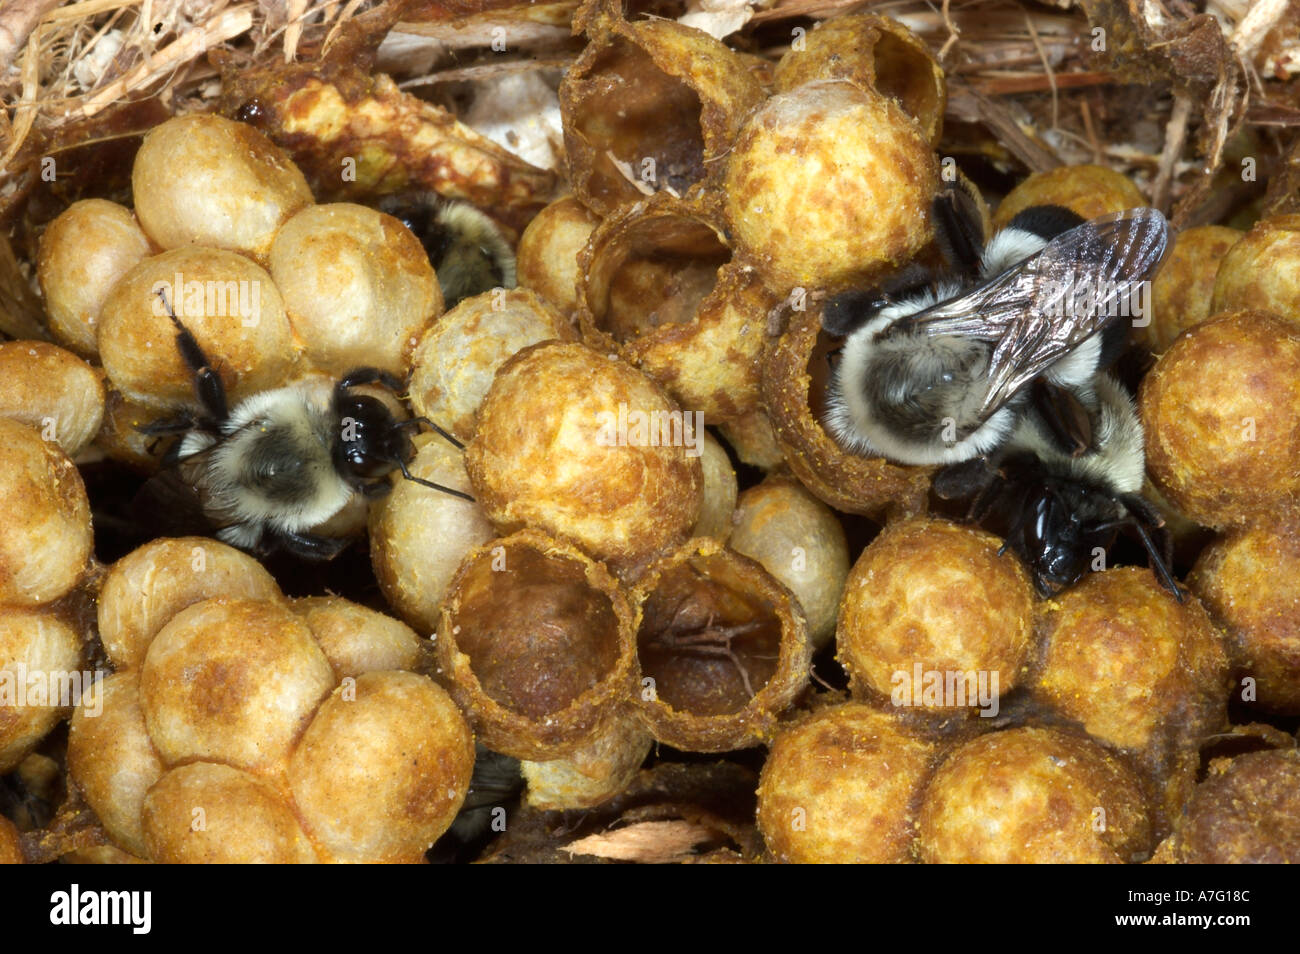 Bumblebee workers in nest showing wax cells with honey pollen and developing bees pupating into adults  Stock Photo